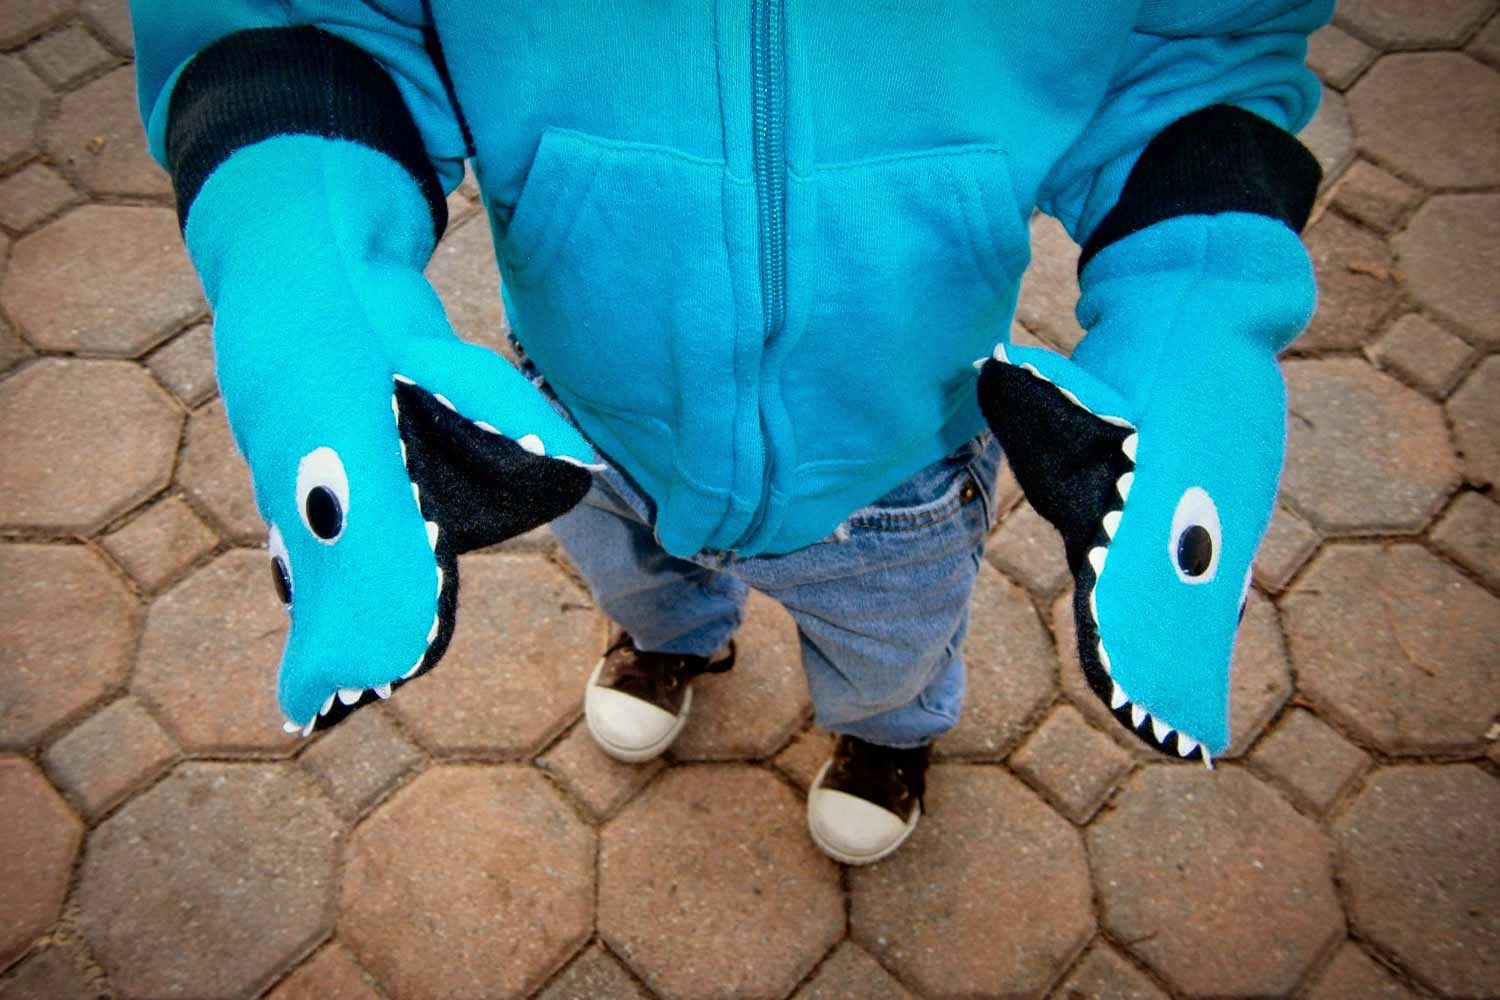 Cool! Shark gloves - from Instructables